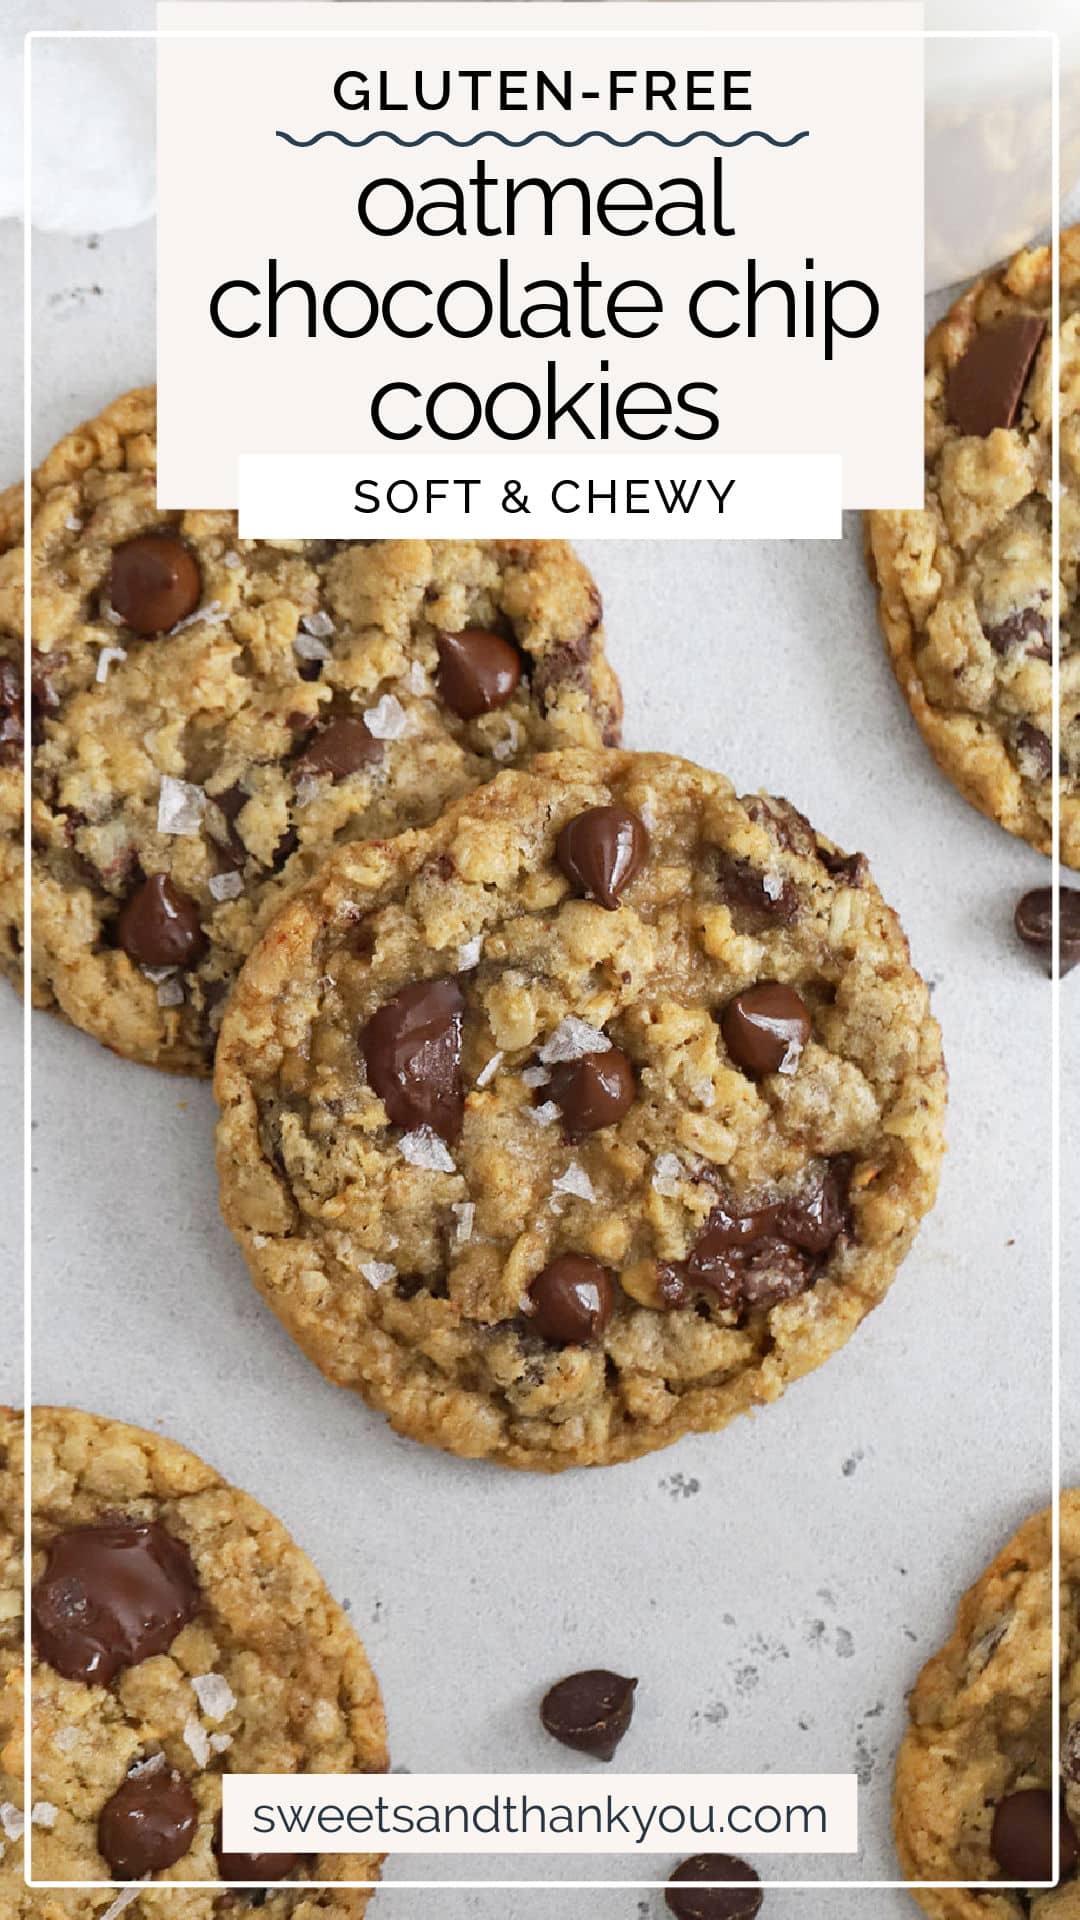 This Gluten-Free Oatmeal Chocolate Chip Cookies recipe is soft, chewy, and full of chocolate in every bite. The perfect classic cookie recipe! // gluten-free oatmeal cookies // gluten-free oatmeal cookie recipe / gluten-free chocolate chip oatmeal cookie recipe / gluten-free cookies / gluten-free christmas cookies / easy gluten-free cookie recipe